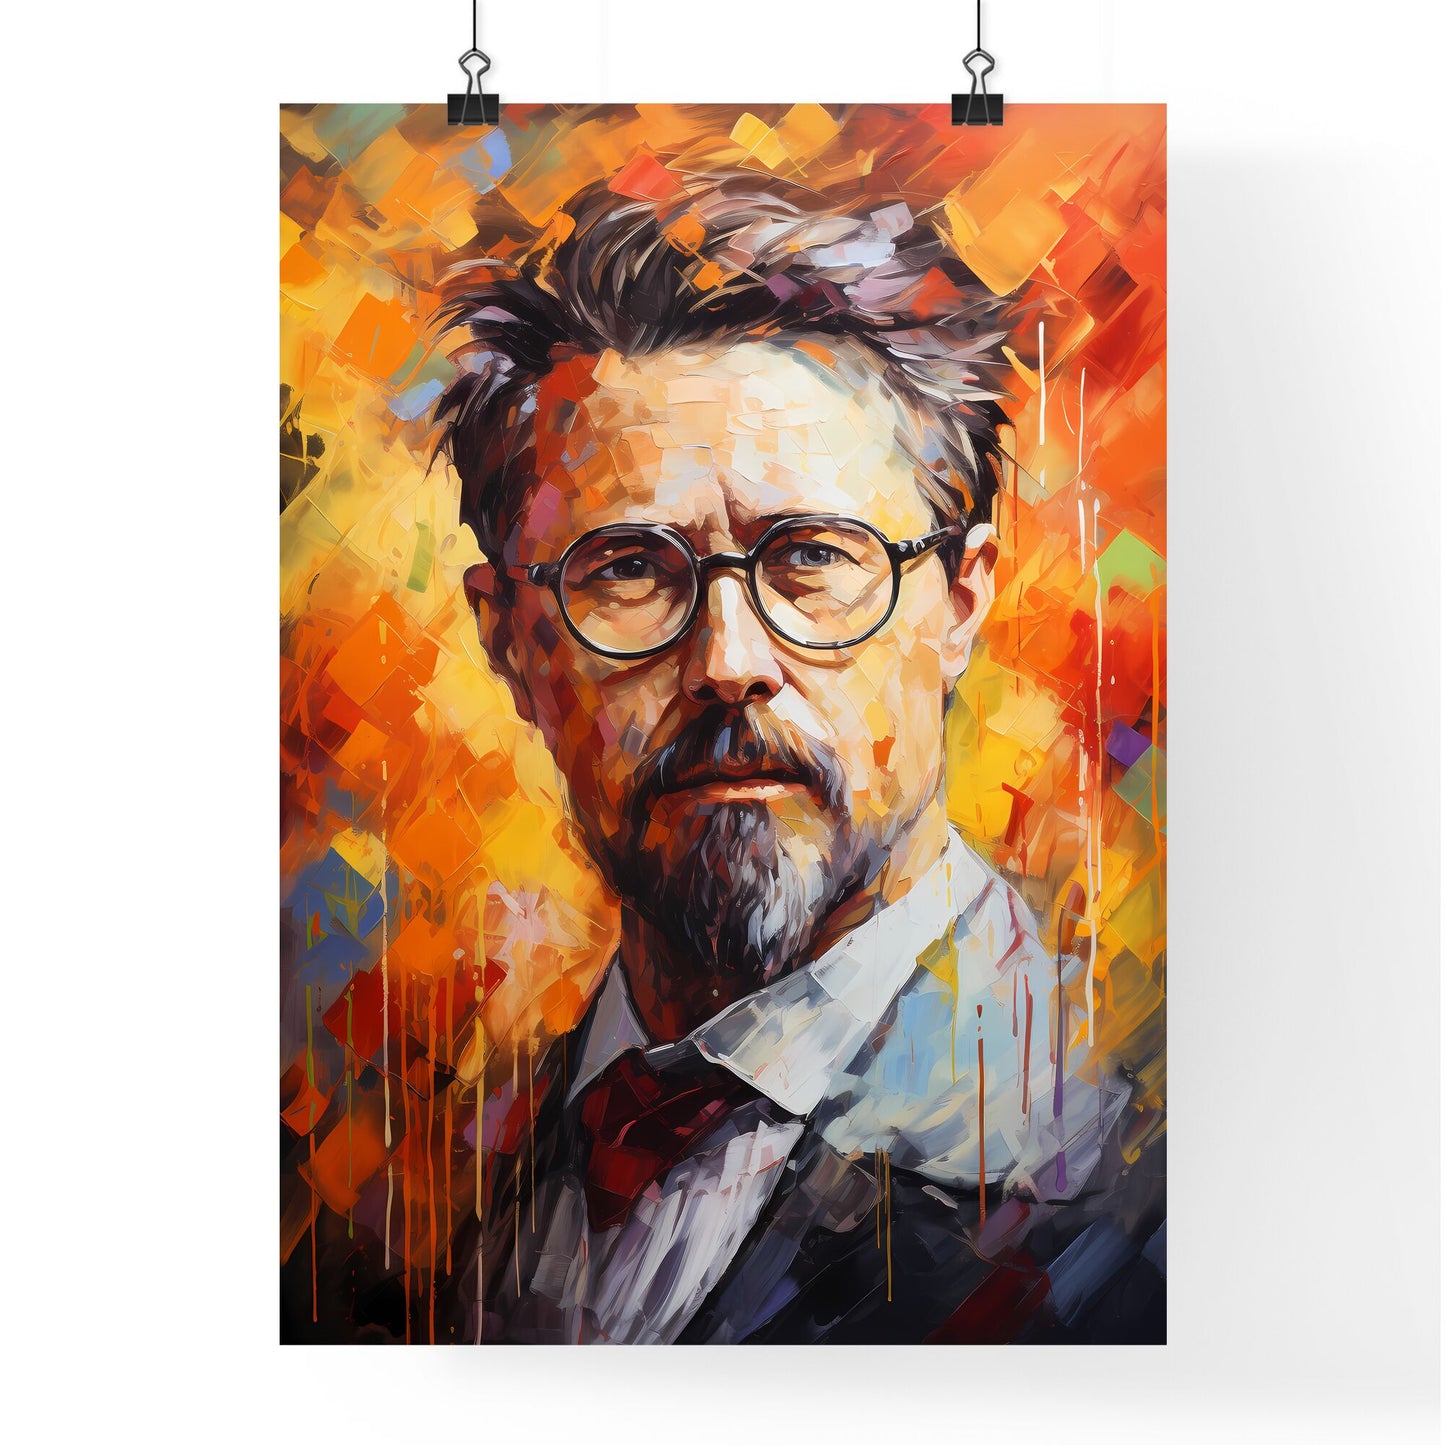 Anton Chekhov - A Painting Of A Man With Glasses Default Title